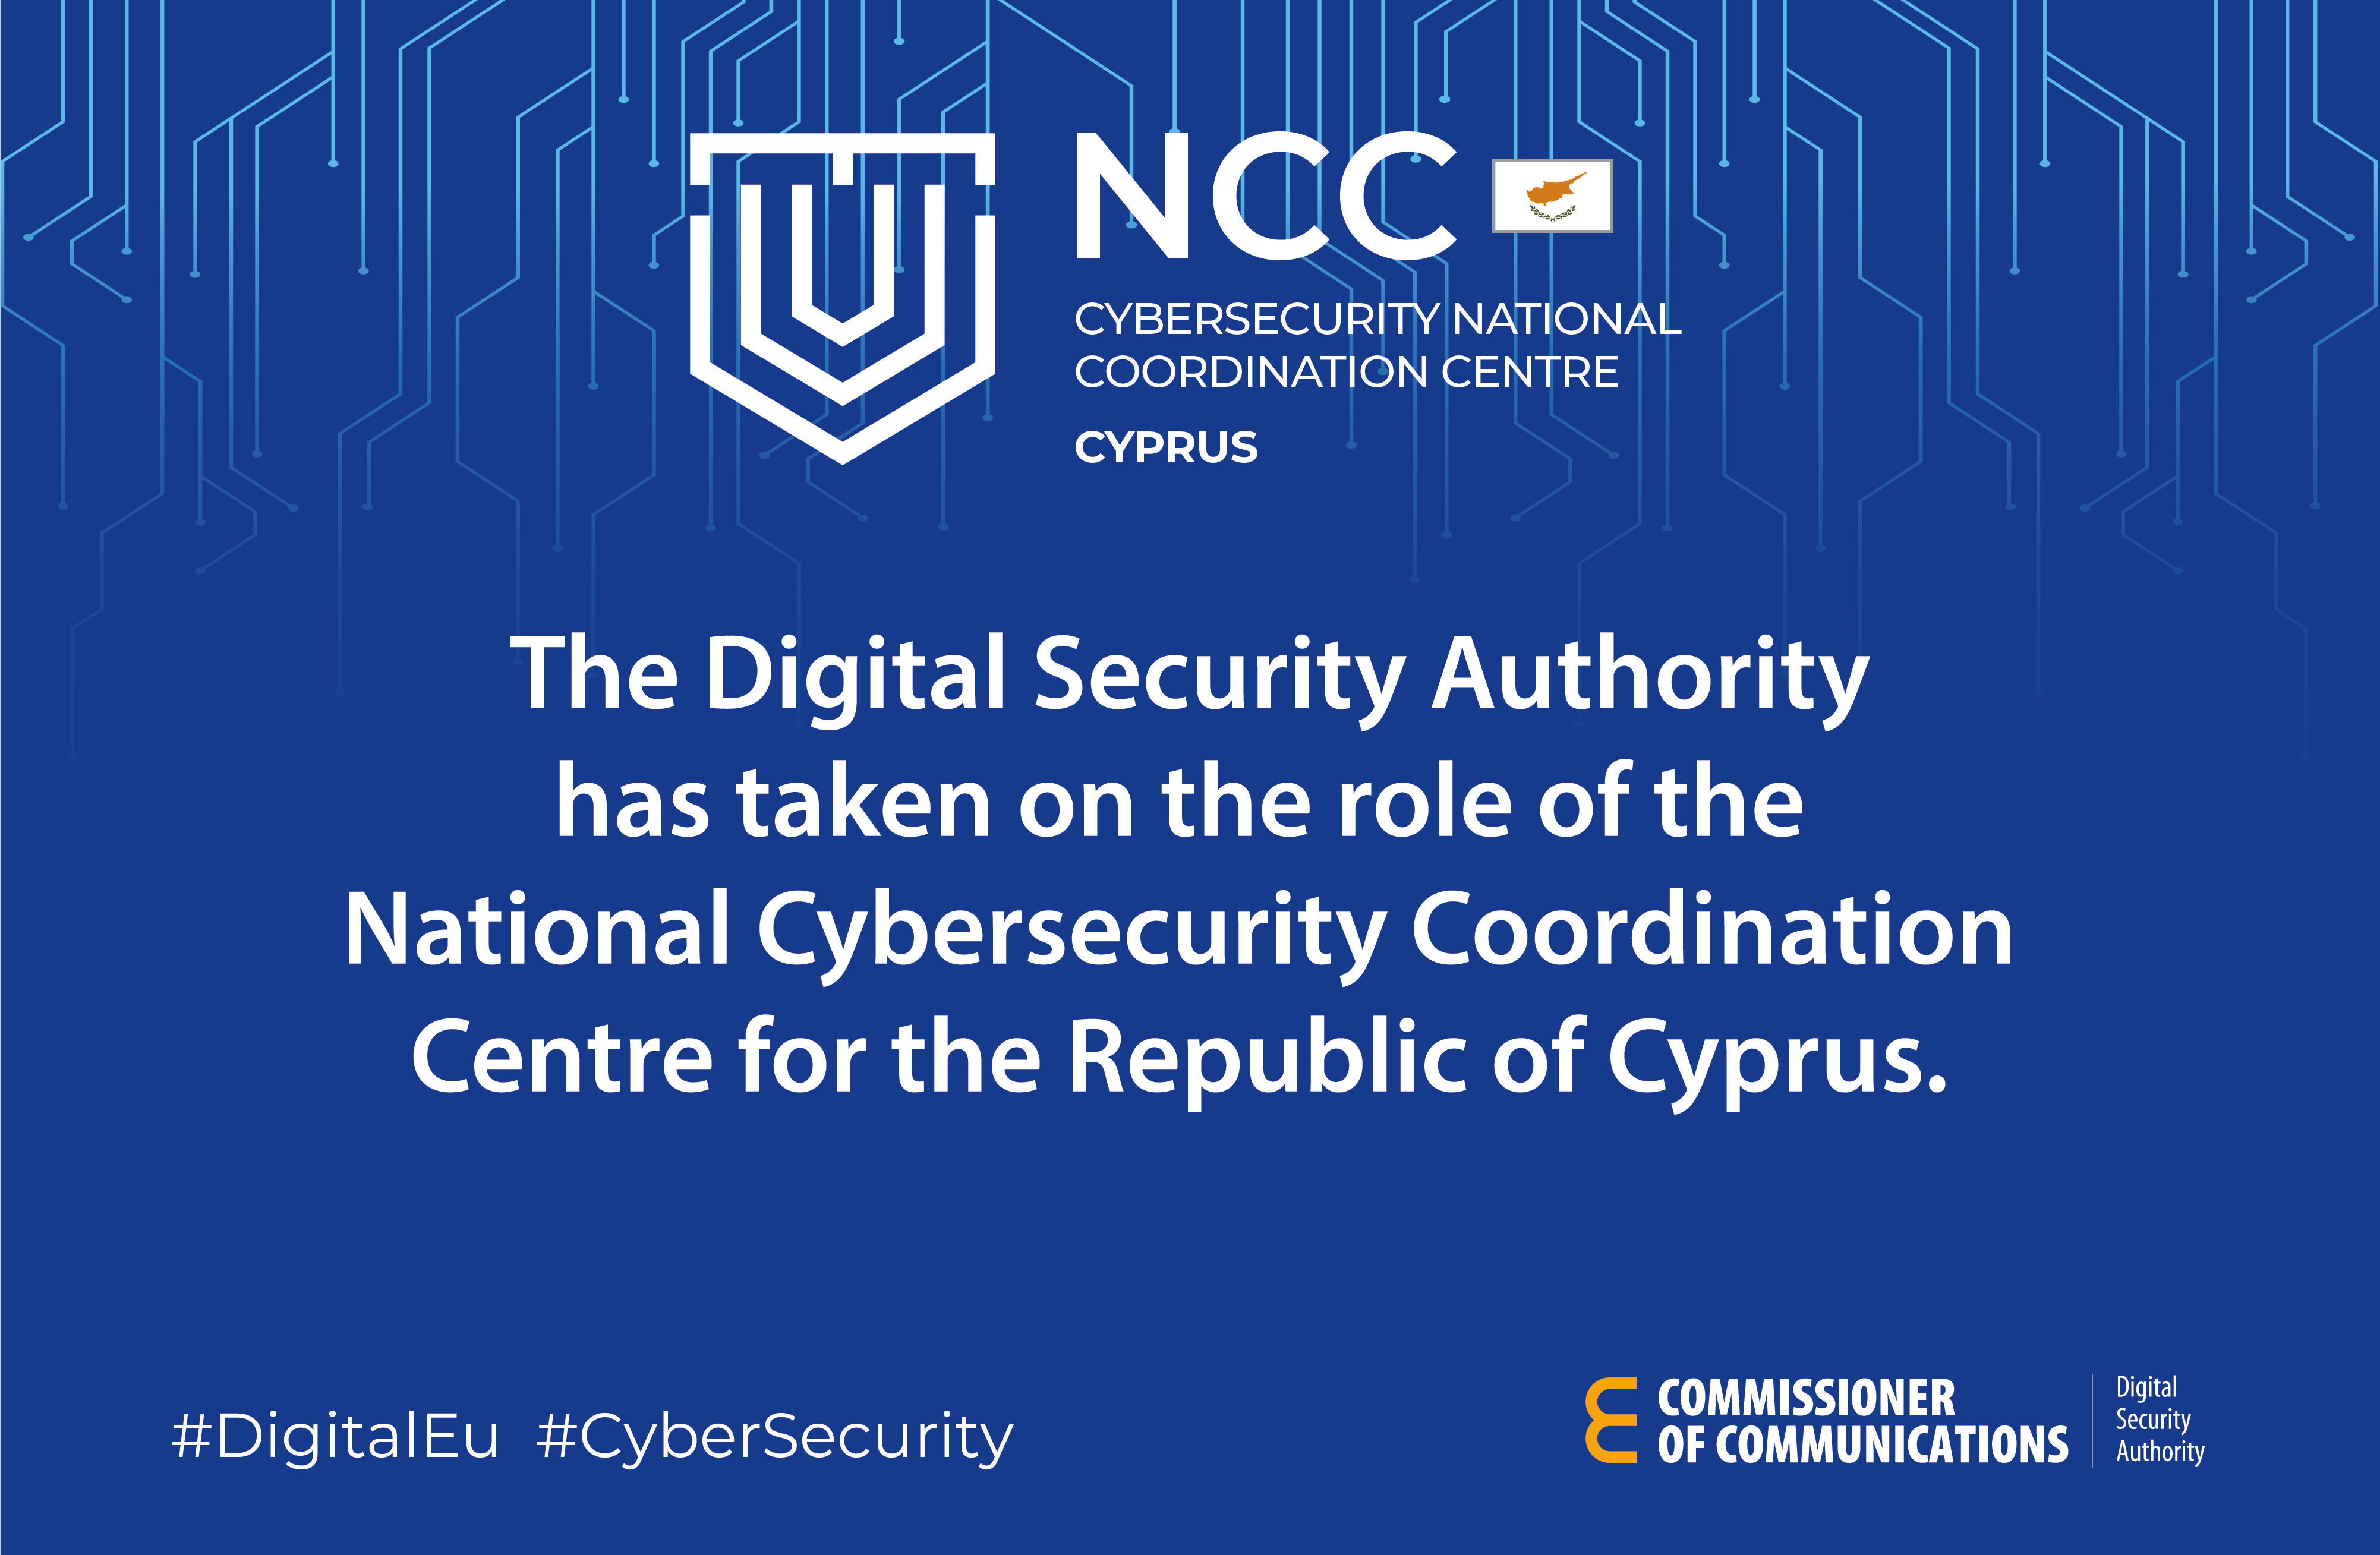 Positive Evaluation of the Digital Security Authority for Fund Management at the National Cybersecurity Coordination Centre